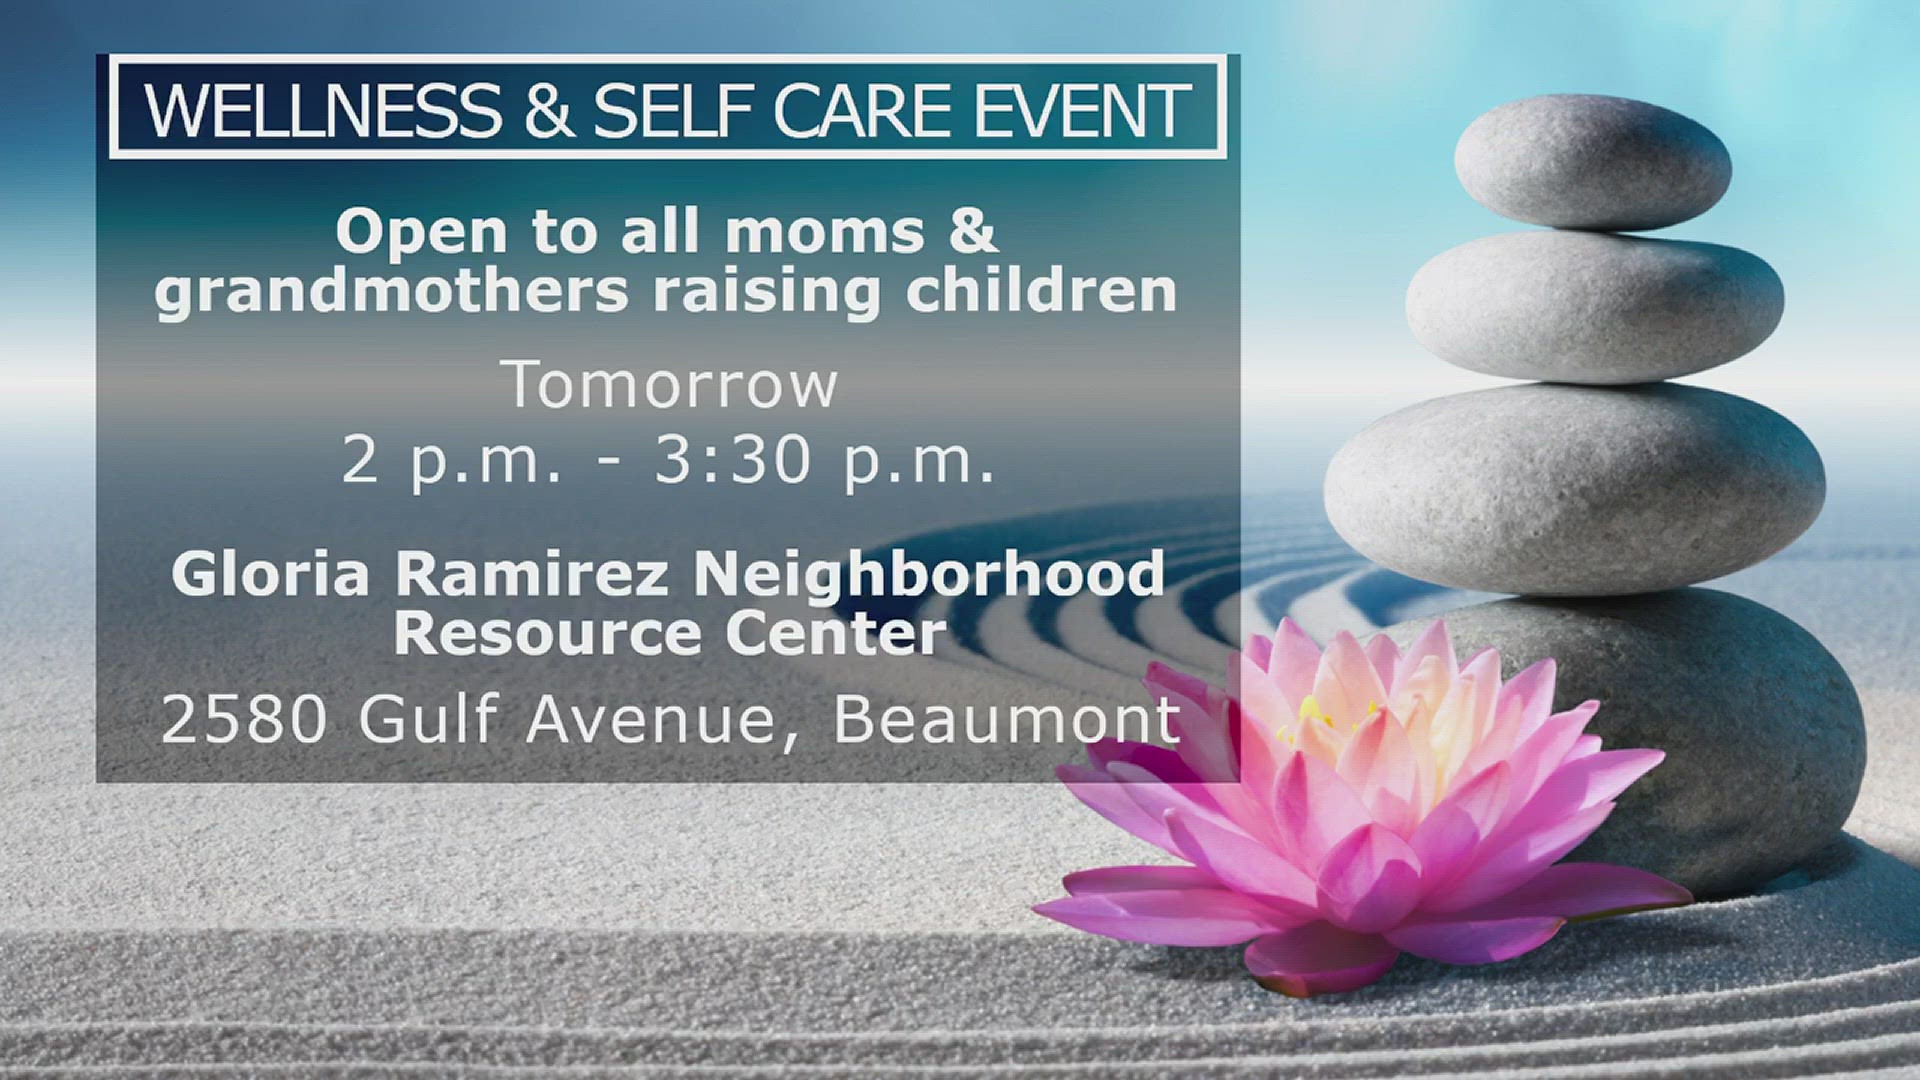 Mothers and grandmothers can obtain health info and resources tomorrow afternoon at the Gloria Ramirez Neighborhood Resource Center from 2-3:30 p.m.